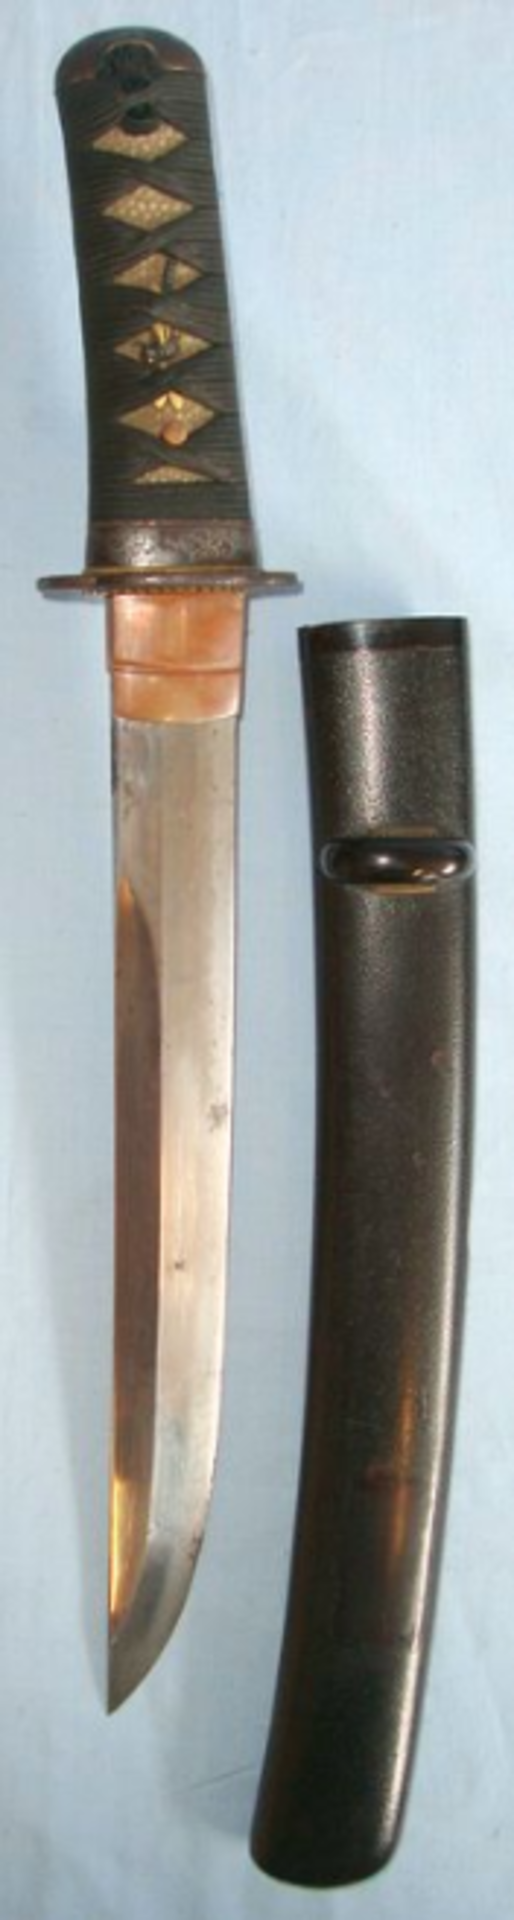 Ancient Blade (C1644-1684) Japanese Tanto By Kaboku - Image 2 of 3